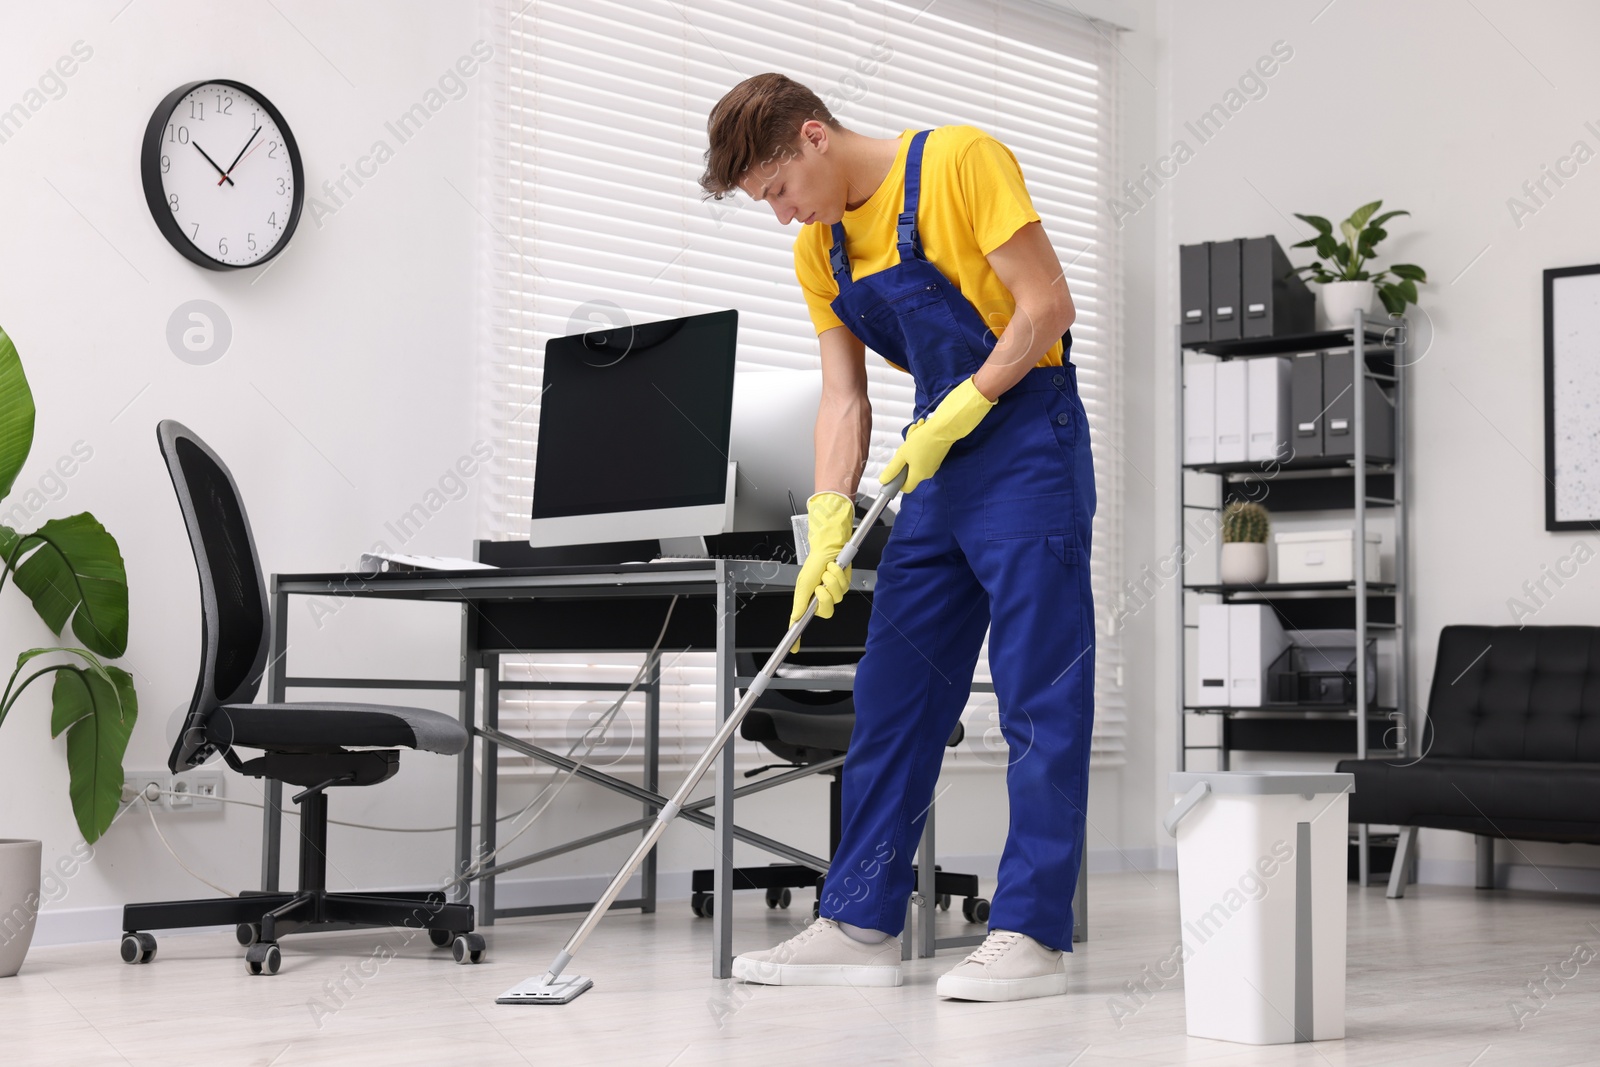 Photo of Cleaning service. Man washing floor with mop in office